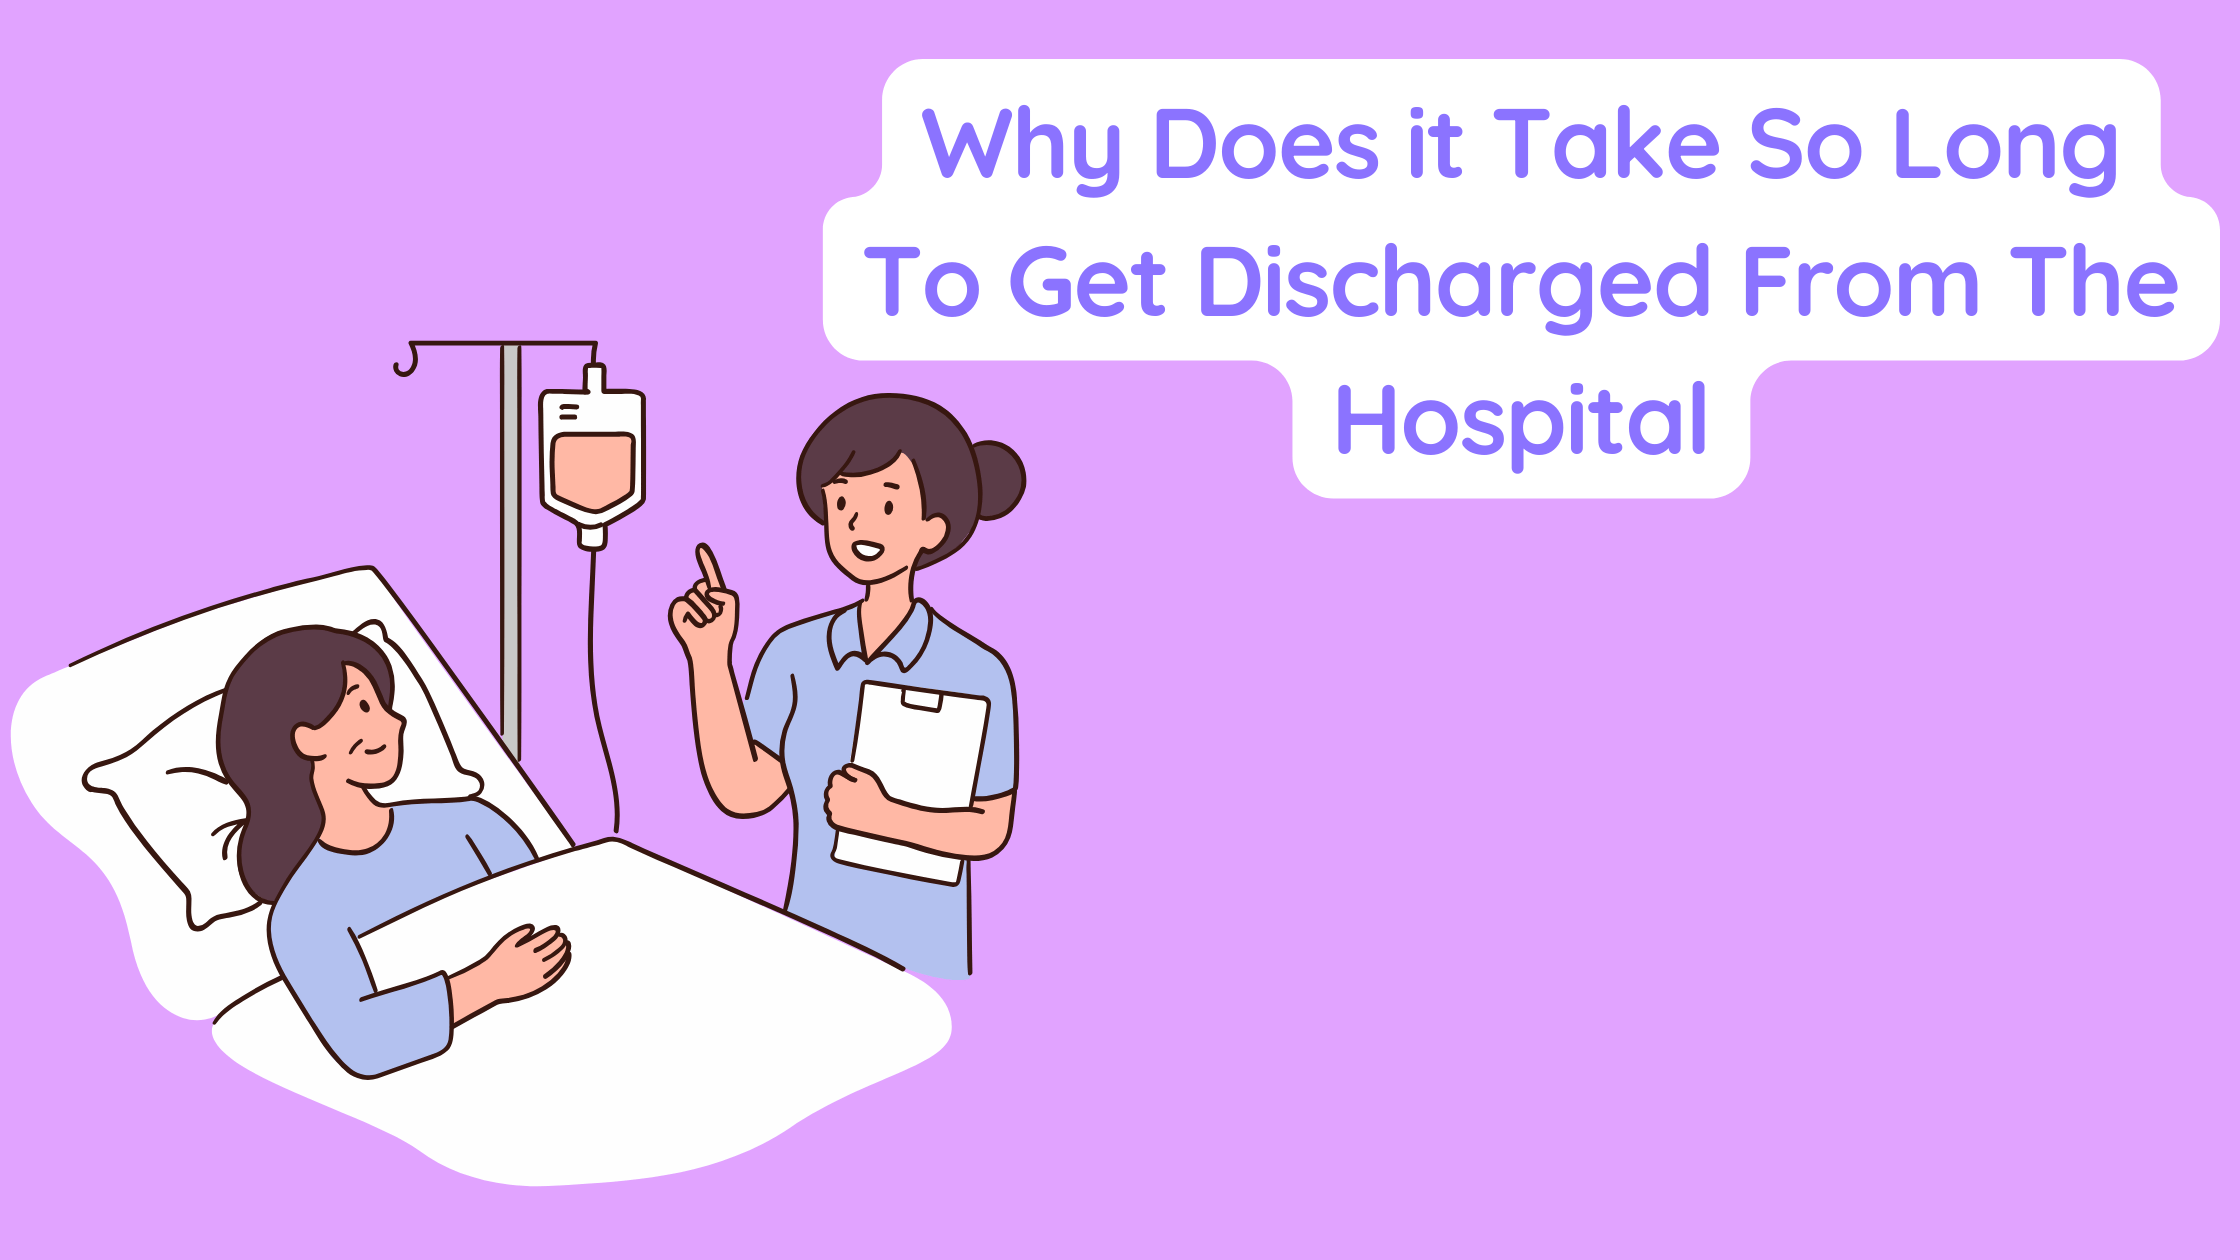 Why Does it Take So Long To Get Discharged From The Hospital